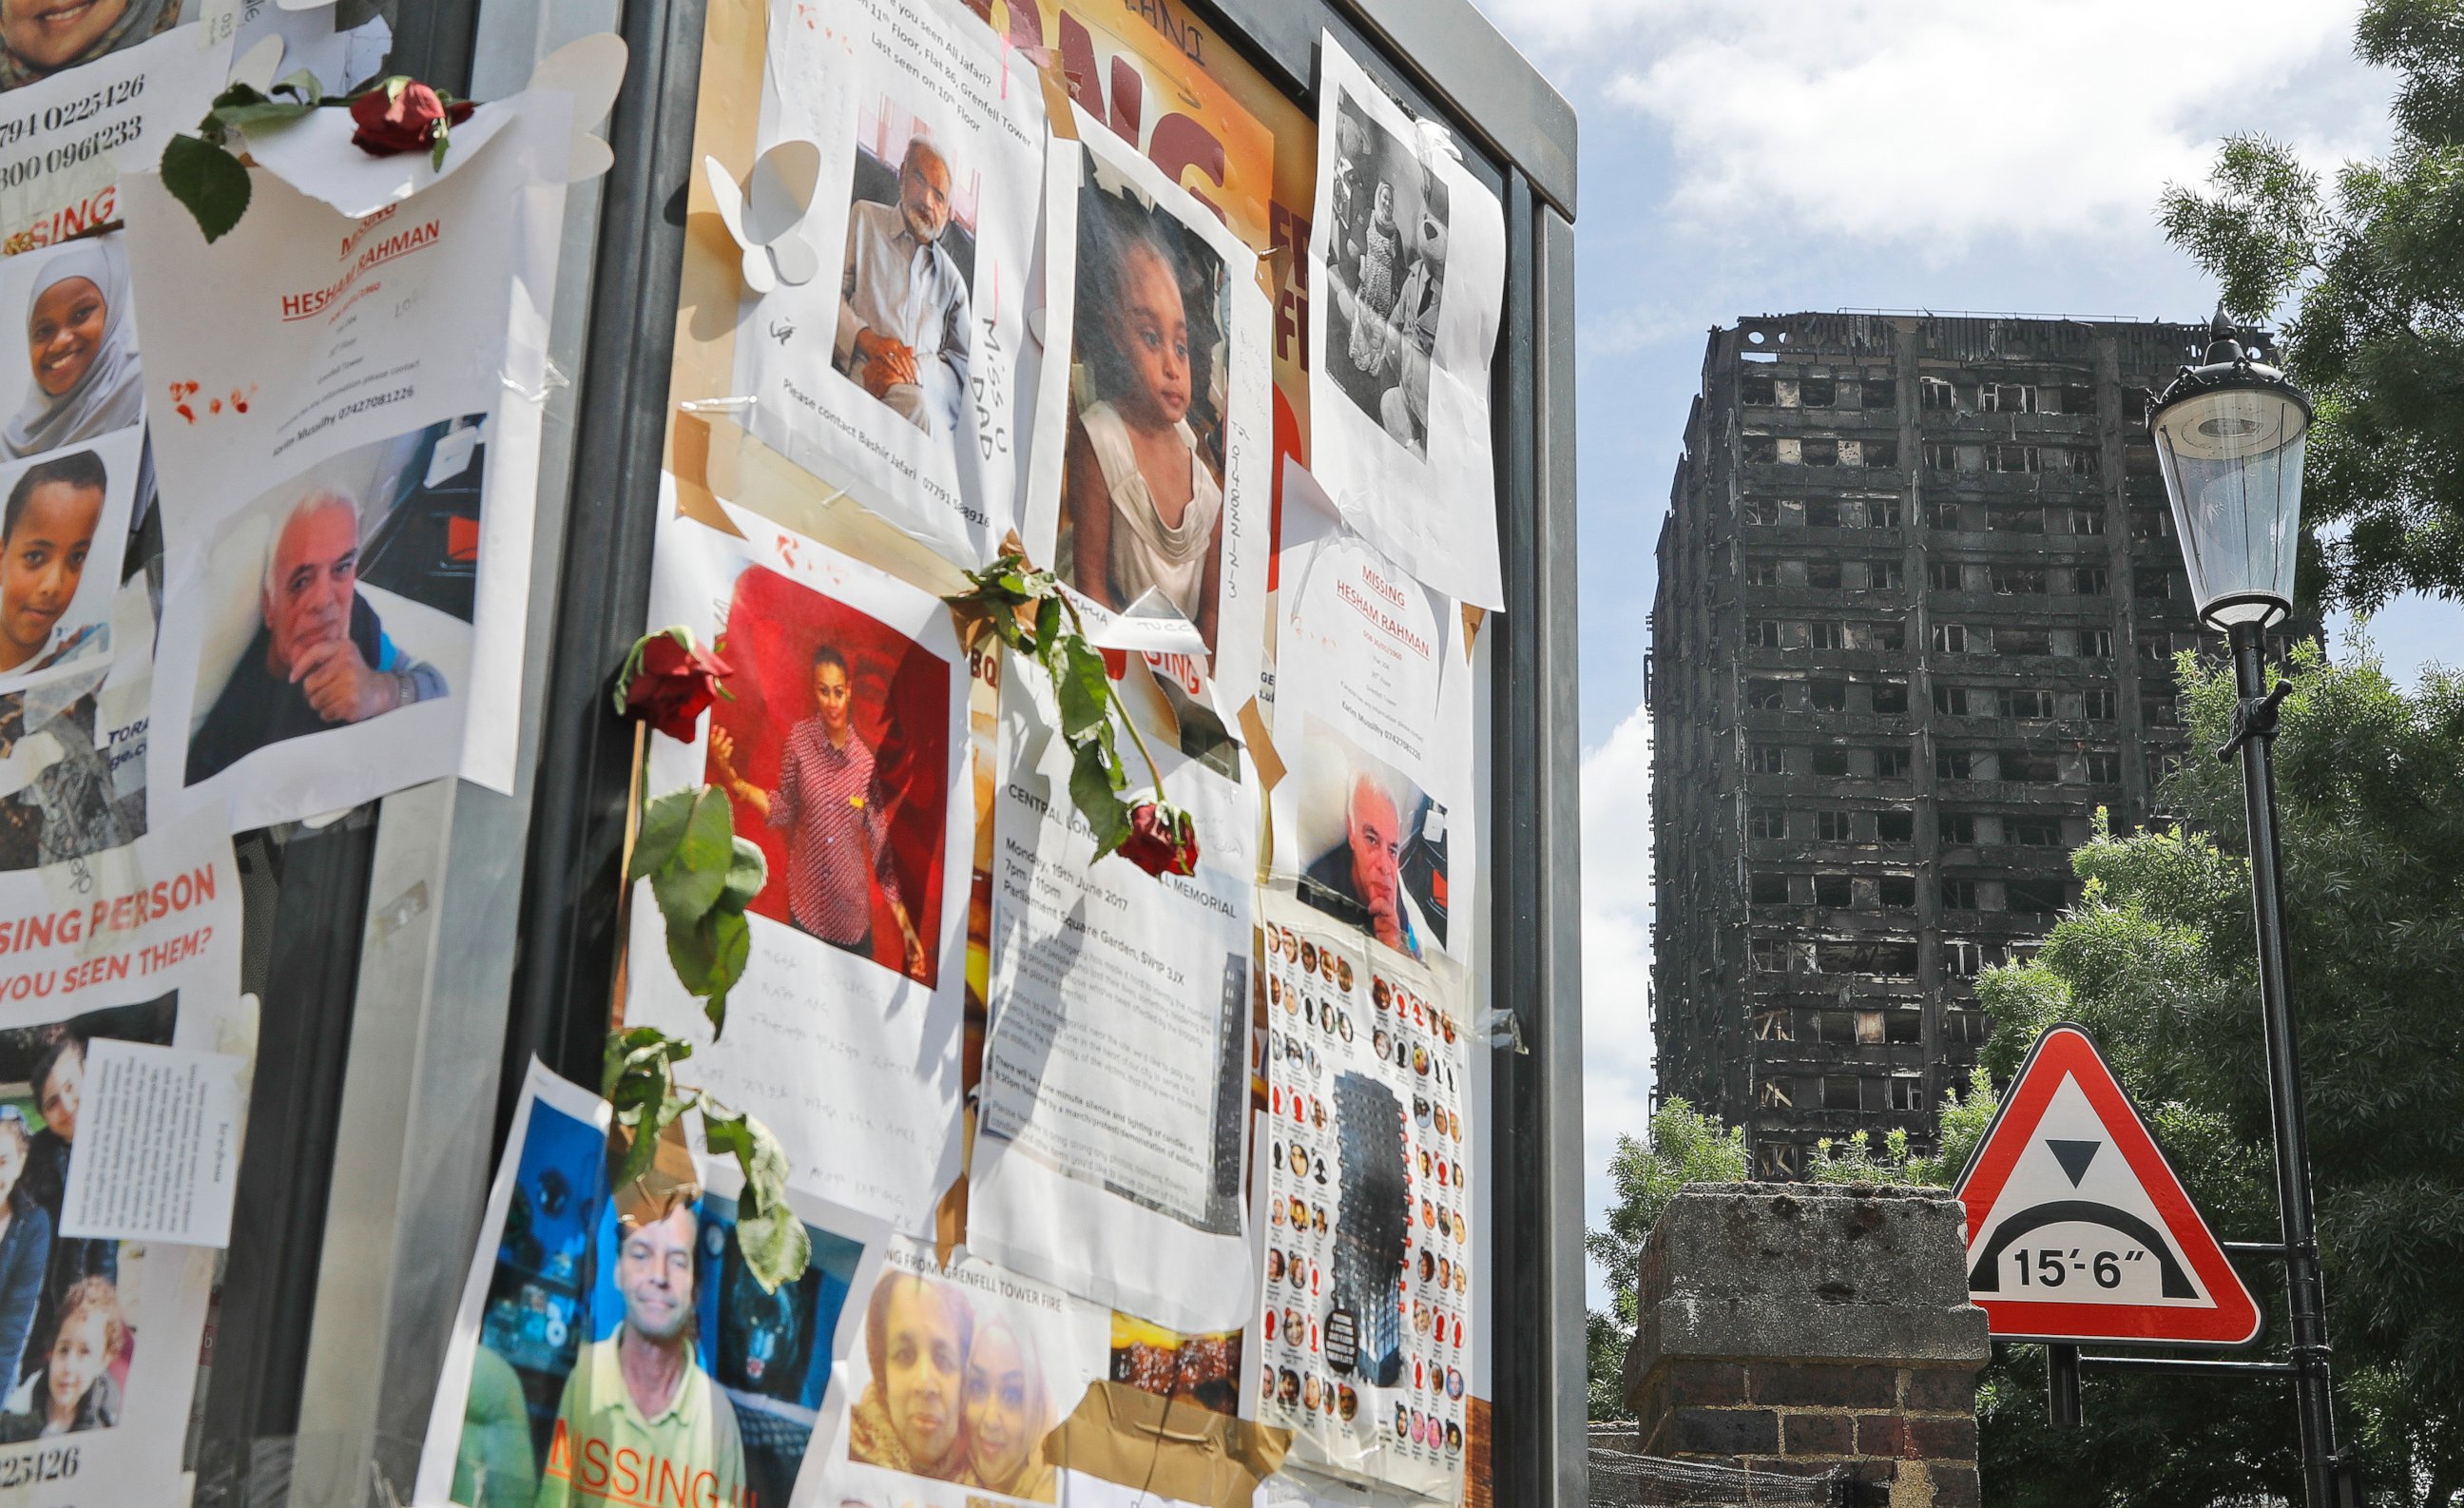 PHOTO: Pictures of missing people on a message board near to the burnt Grenfell Tower apartment building in London, June 23, 2017.